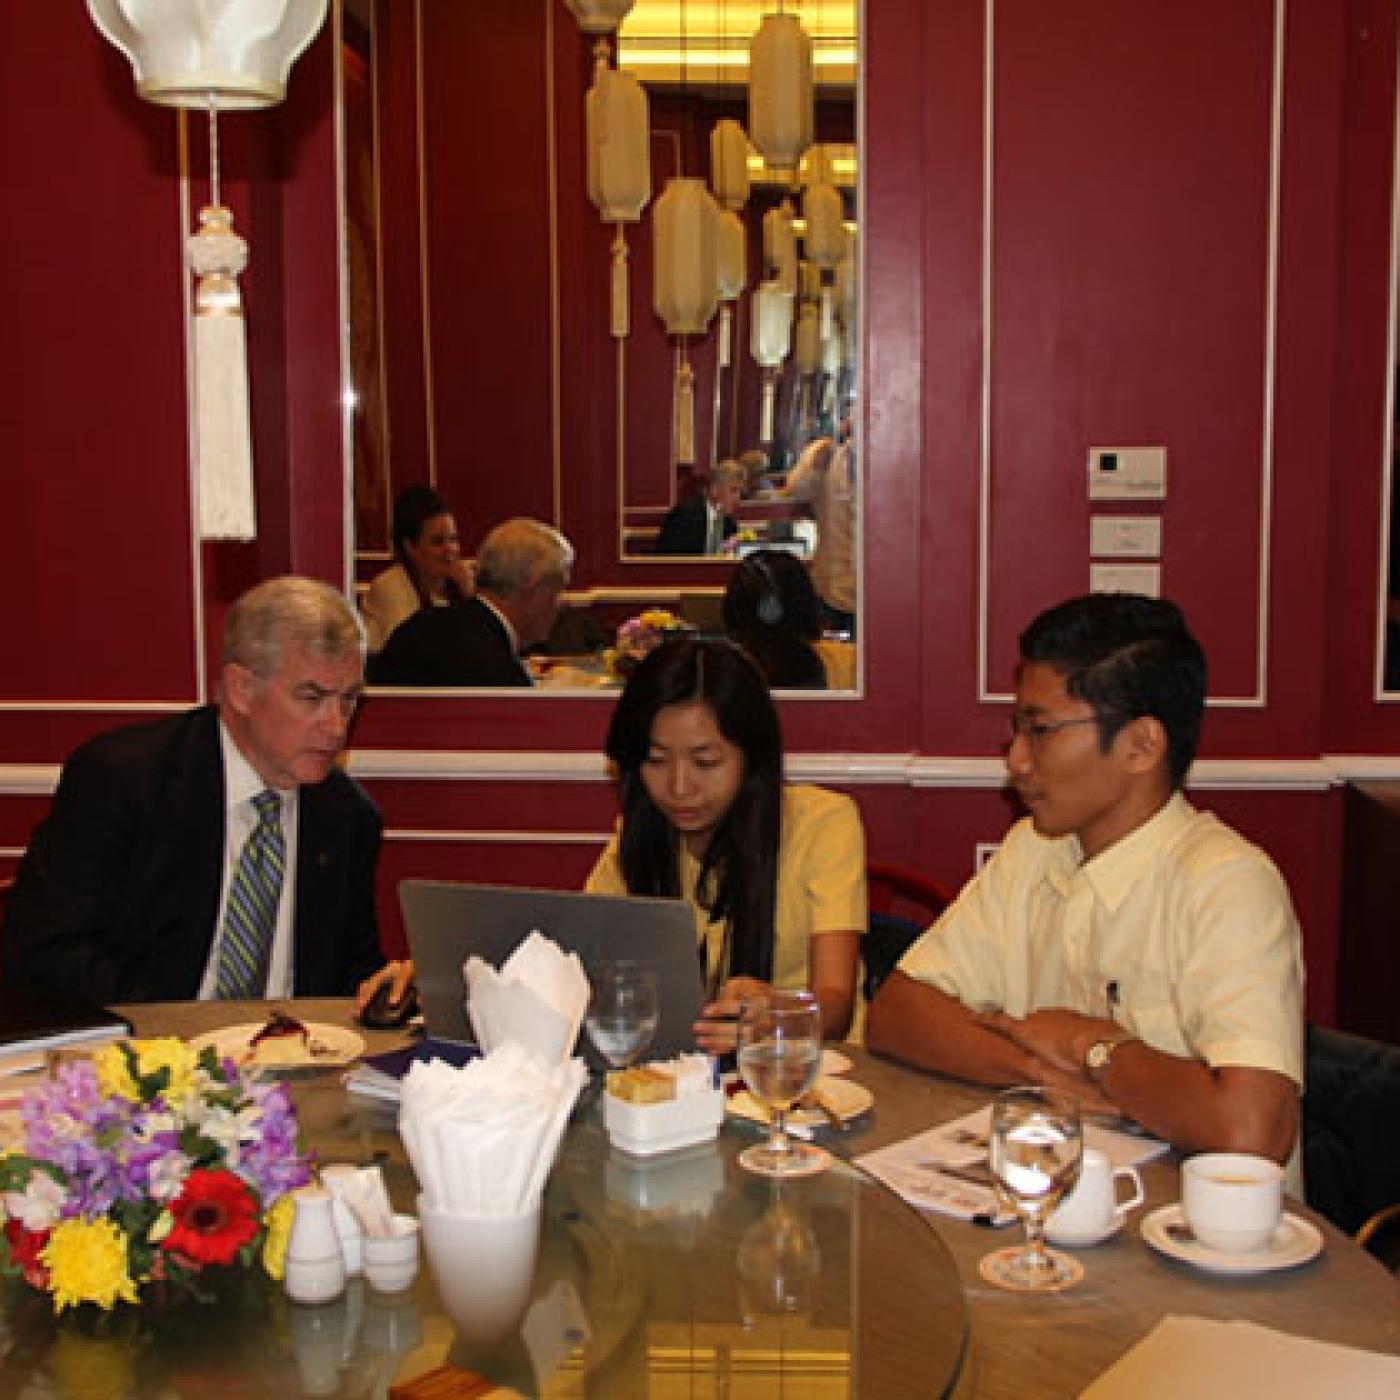 IFES President and CEO Bill Sweeney watches a voter education video, produced by the Myanmar Independent Living Initiative (MILI), with MILI Project Coordinator Theint Theint Phooe and Program Director Nay Lin Soe.